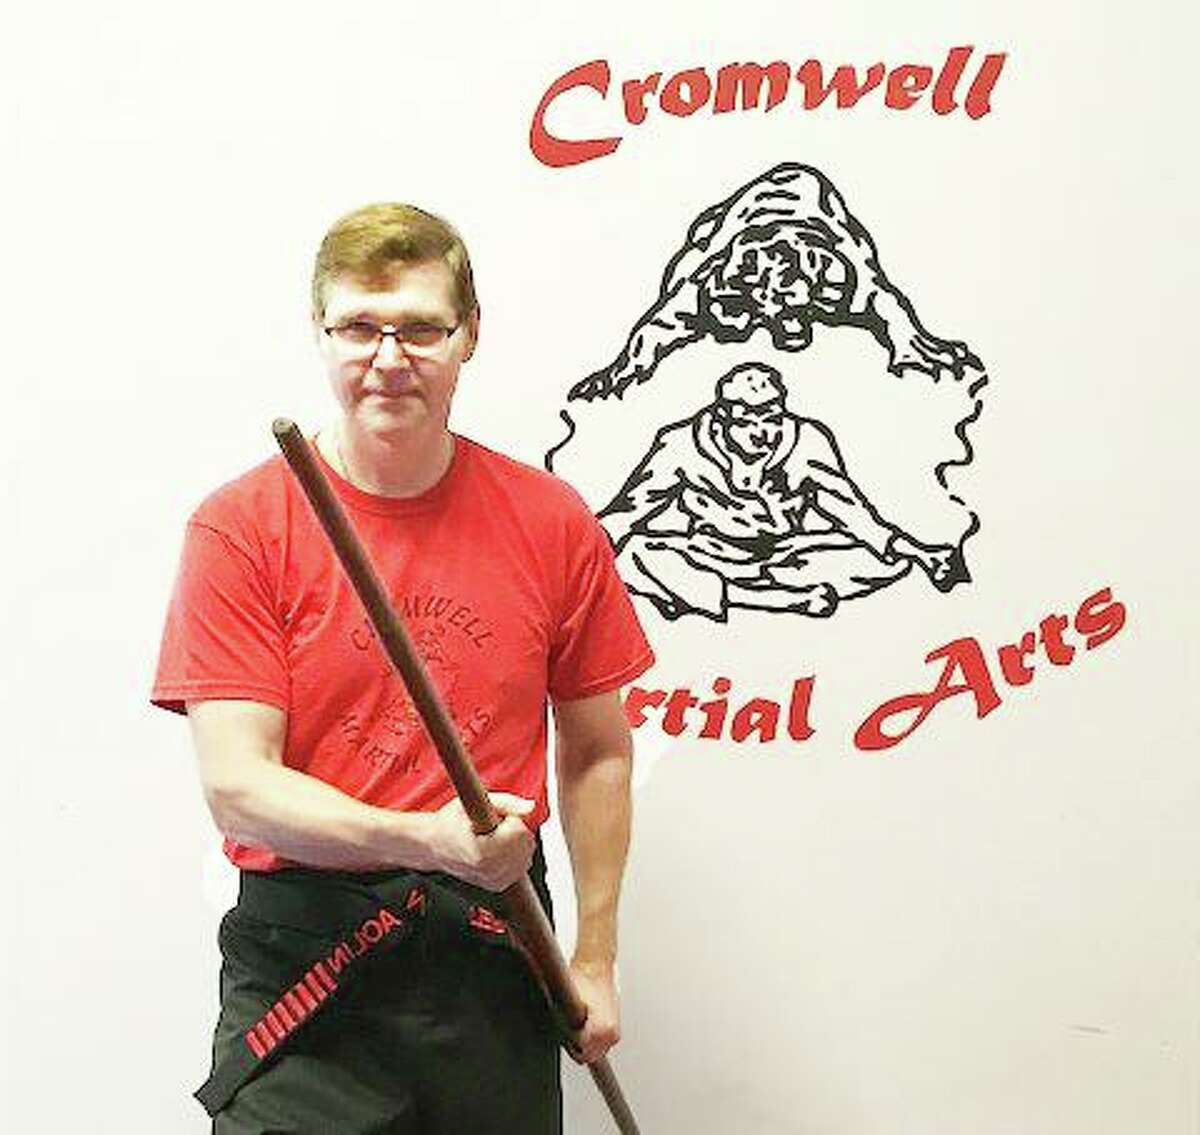 Sensei Frank Shekosky, owner of Cromwell Martial Arts, has been featured in the book “The World’s Greatest,” by Ted Gambordella, which recognizes many of the world’s greatest martial artists.